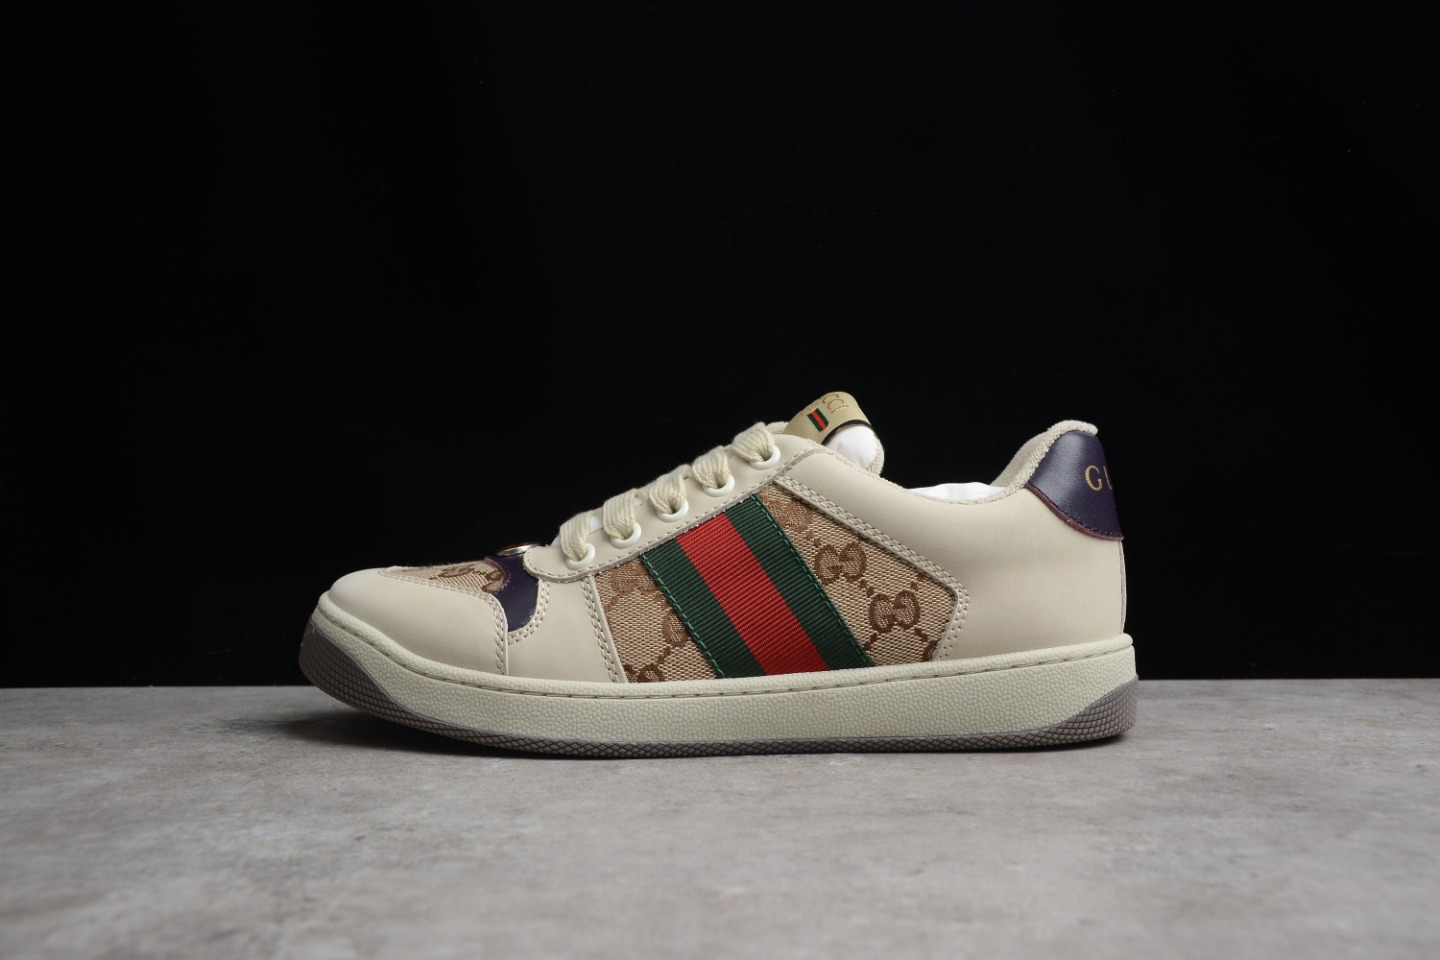 2021 Best quality replica shoes Gucci - StockxPro, Stockx Sneakers 